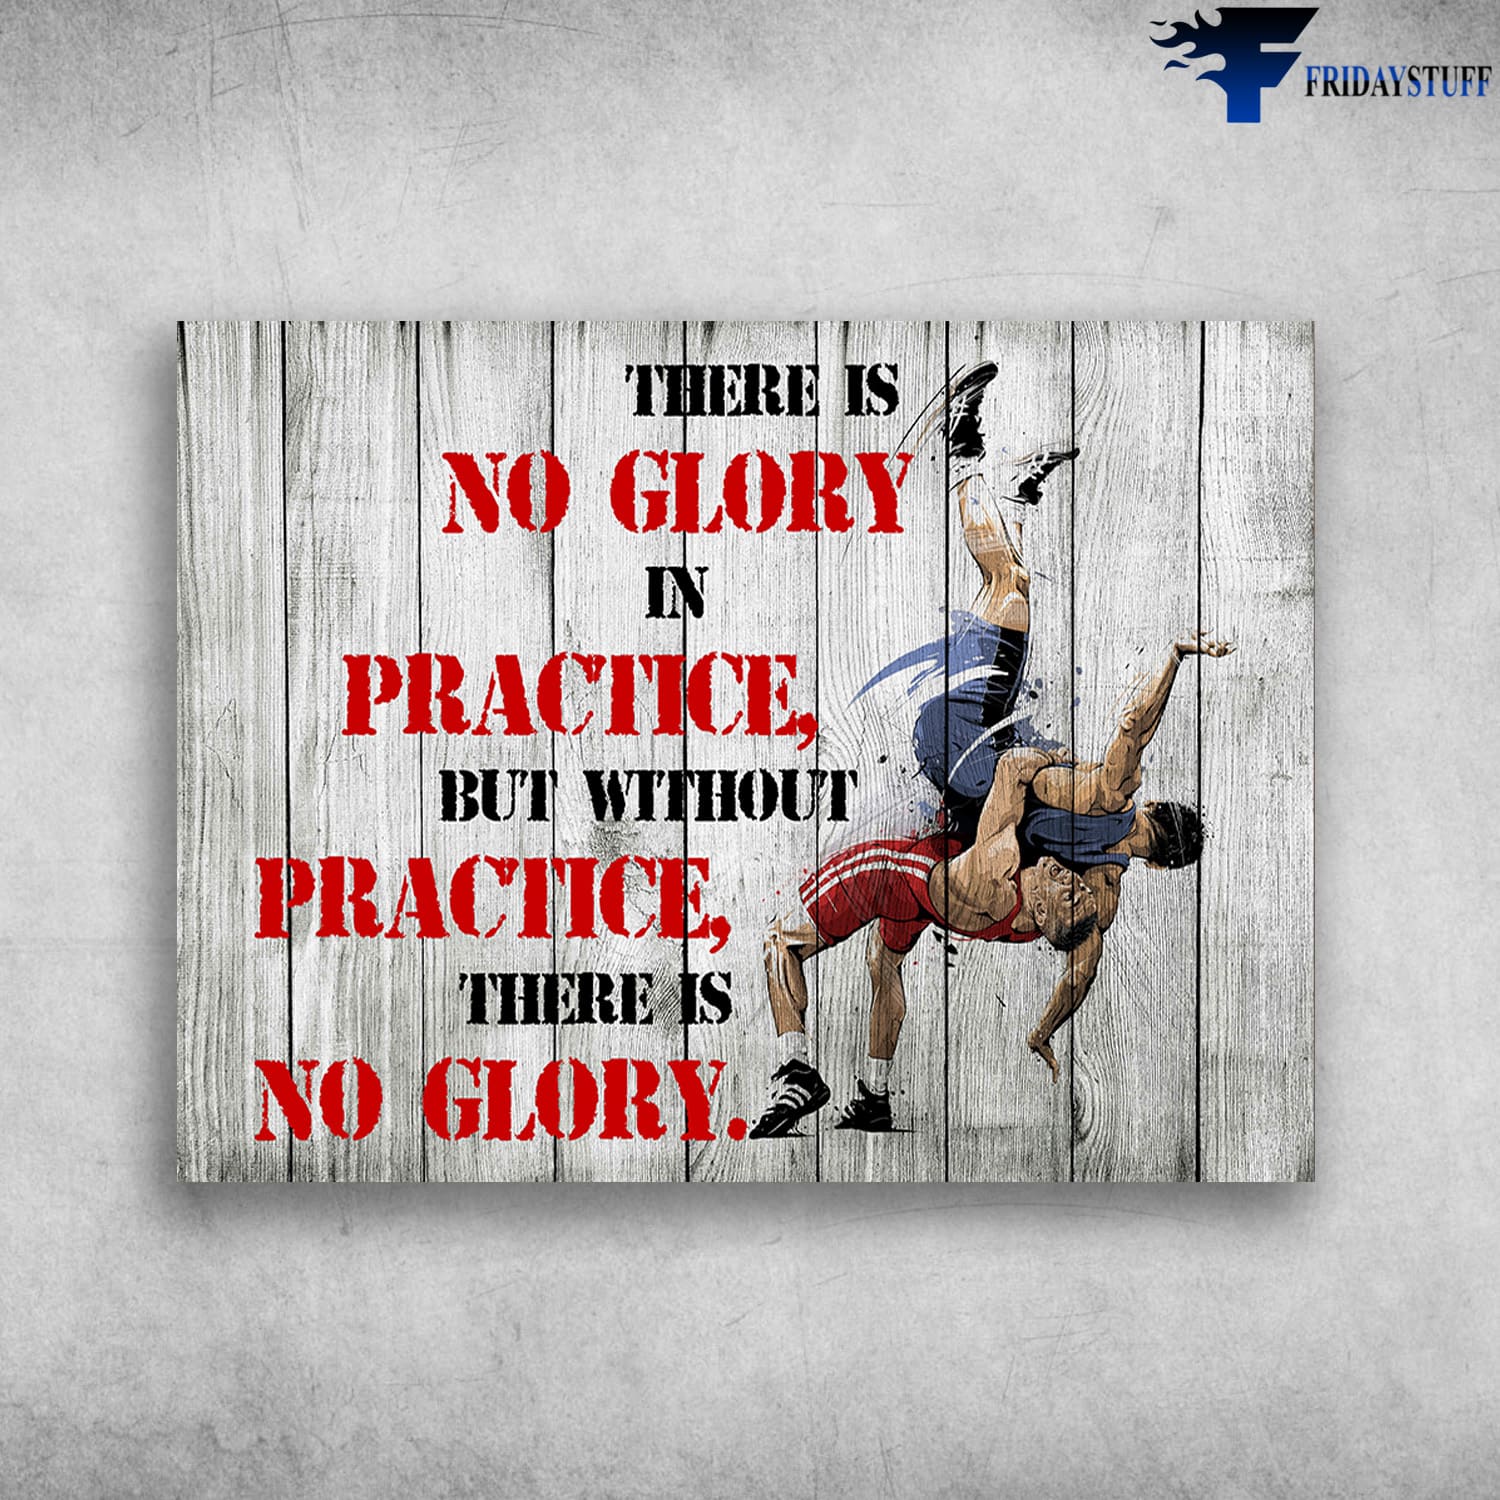 Wrestler Poster, Wrestler Lover, There Is No Glory In Practice, But Without Practice, There Is No Glory